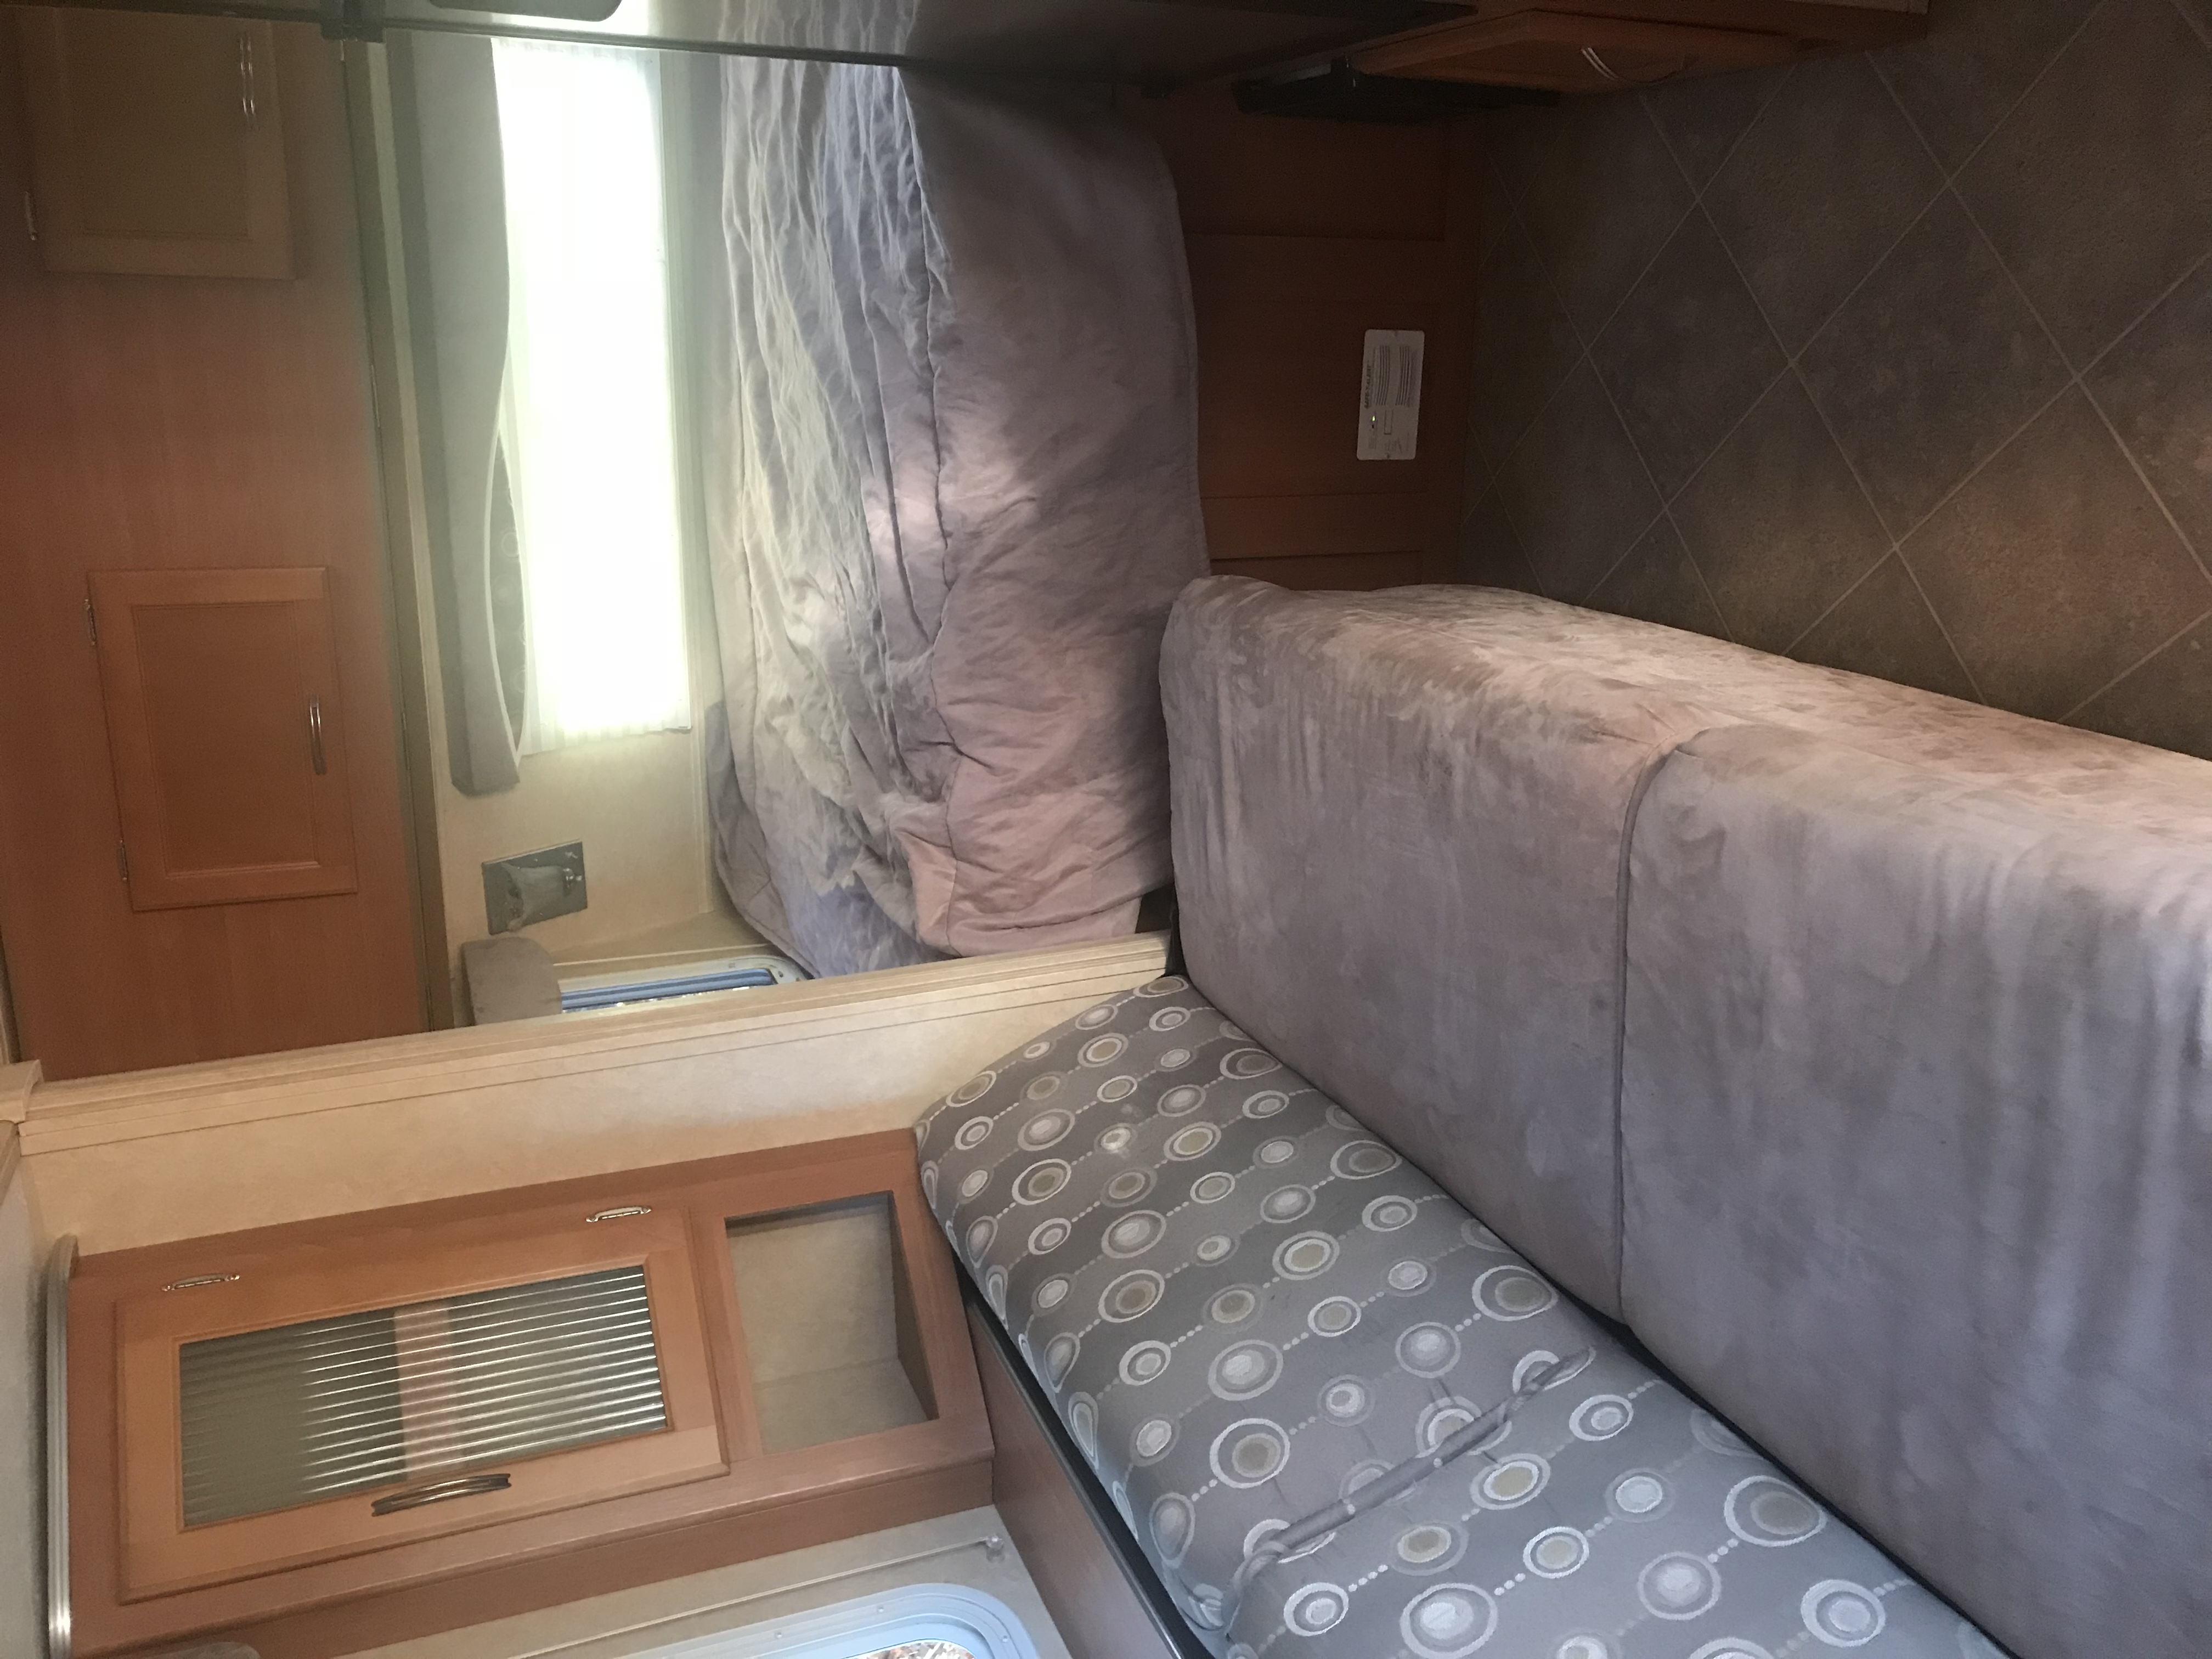 This is how the camper looked before